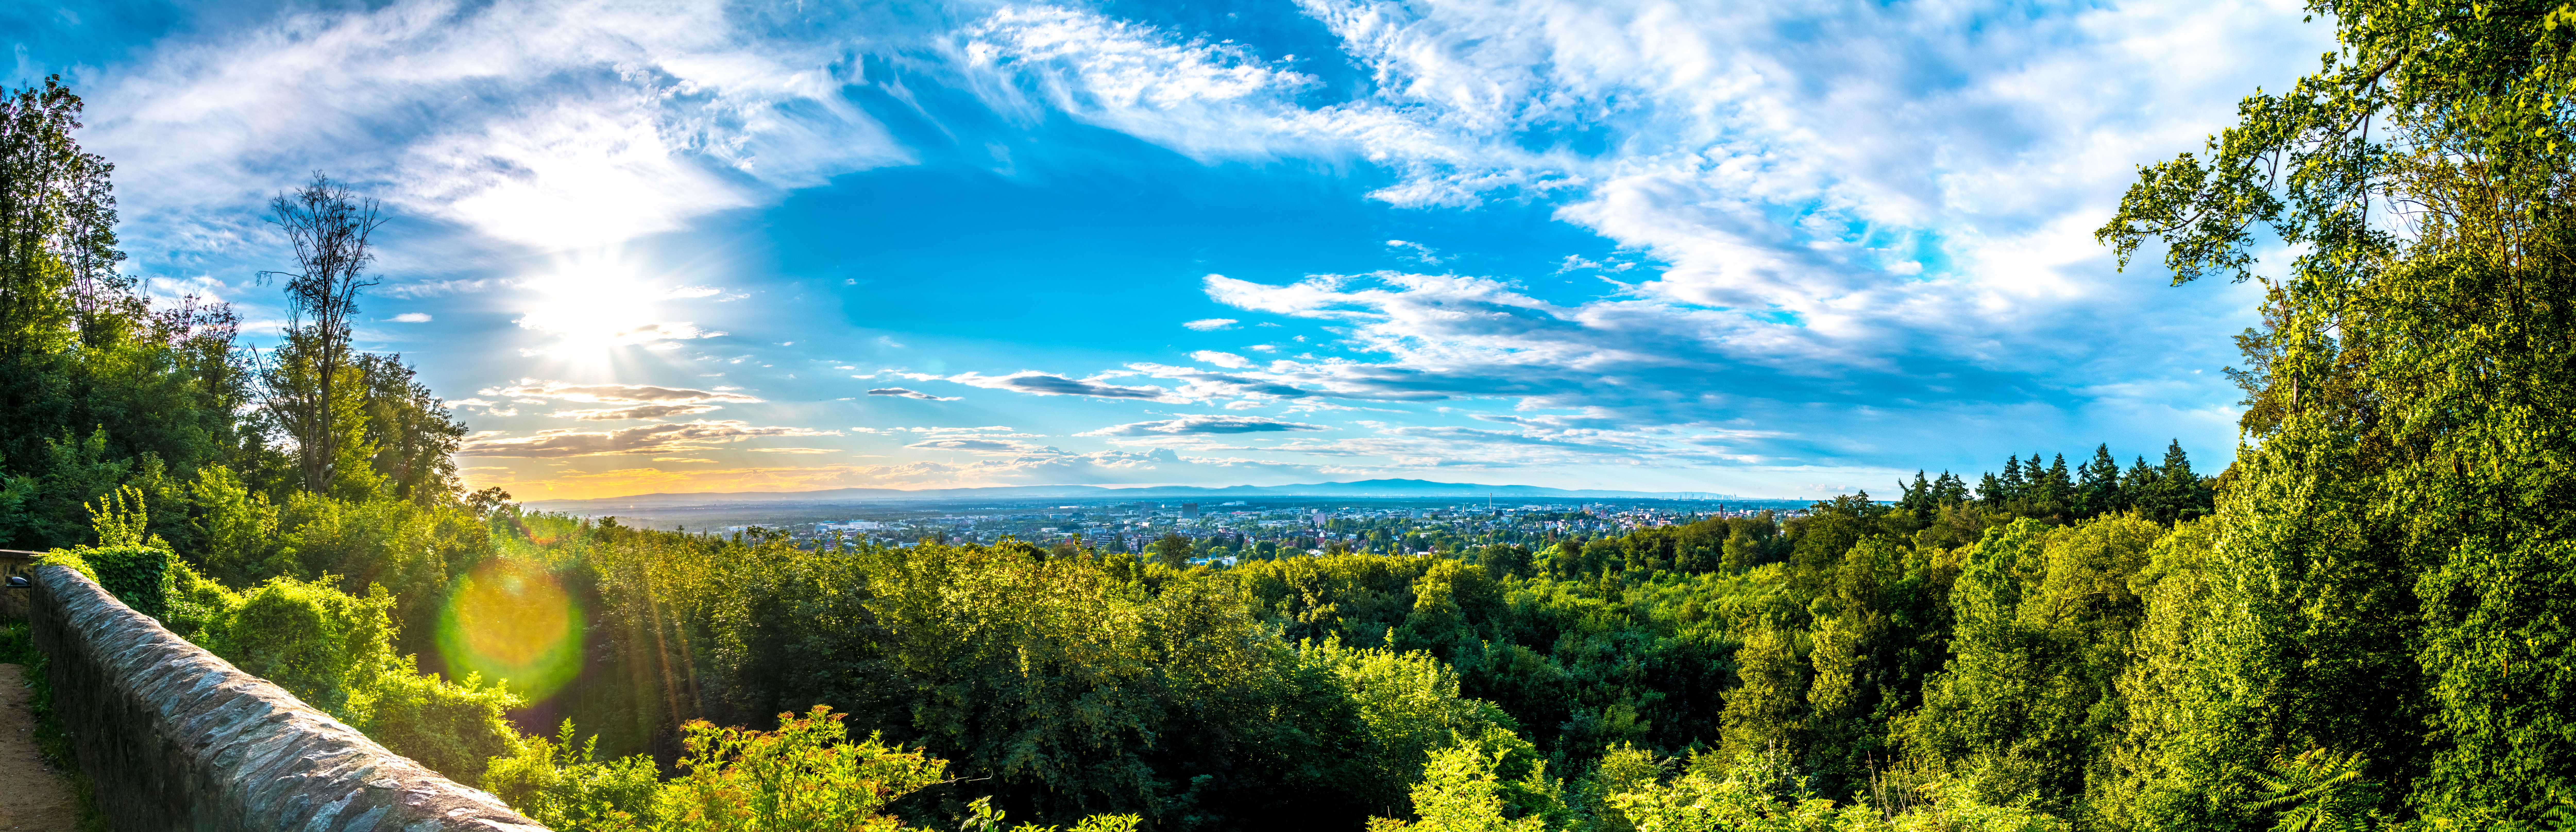 File:Sternwarte Darmstadt HDR Panorama 10MB - Photographed ...